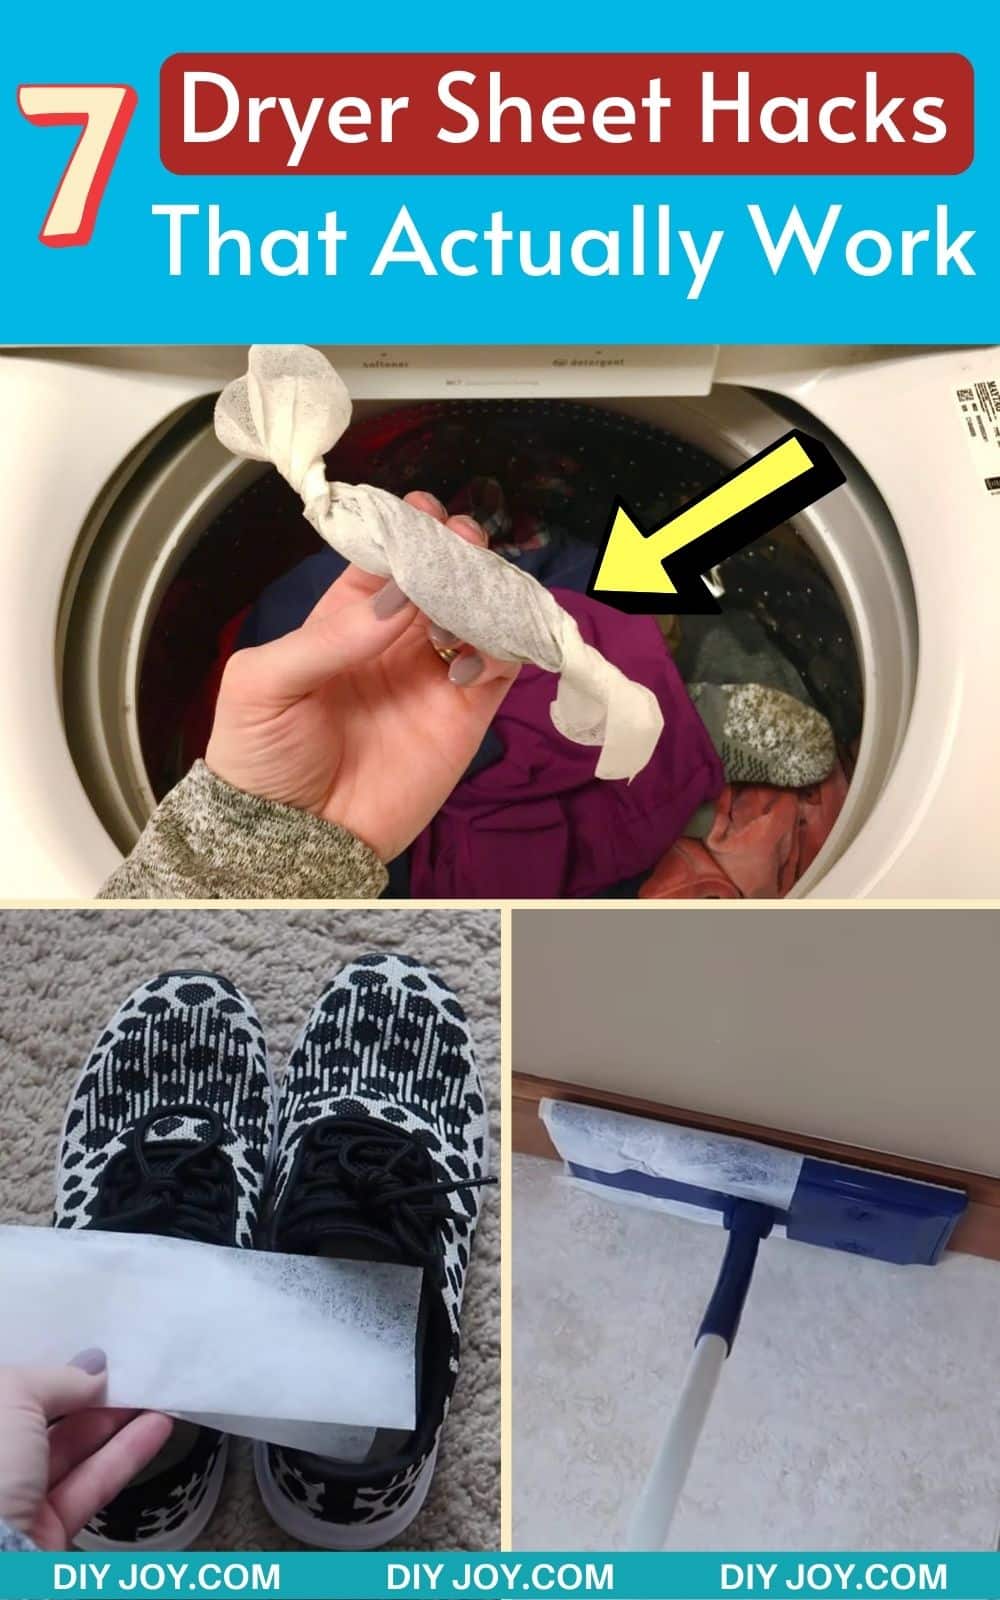 DIY Hacks With Dryer Sheets - Easy Cleaning Tips